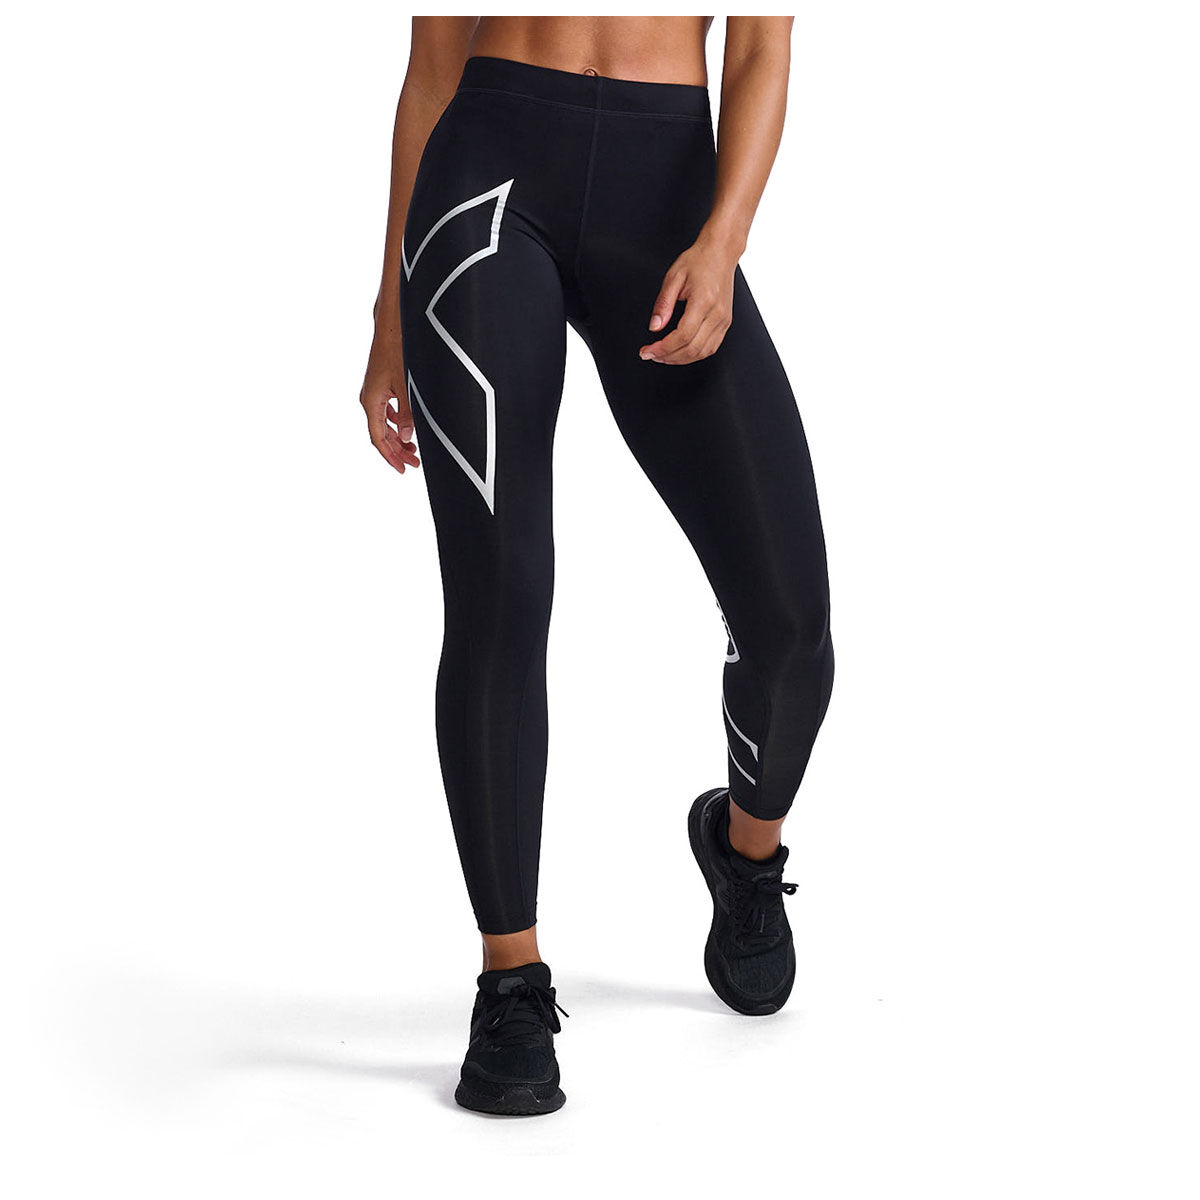  2XU Women's Fitness Compression Tights, Dark Charcoal/Silver,  XX-Small : Clothing, Shoes & Jewelry